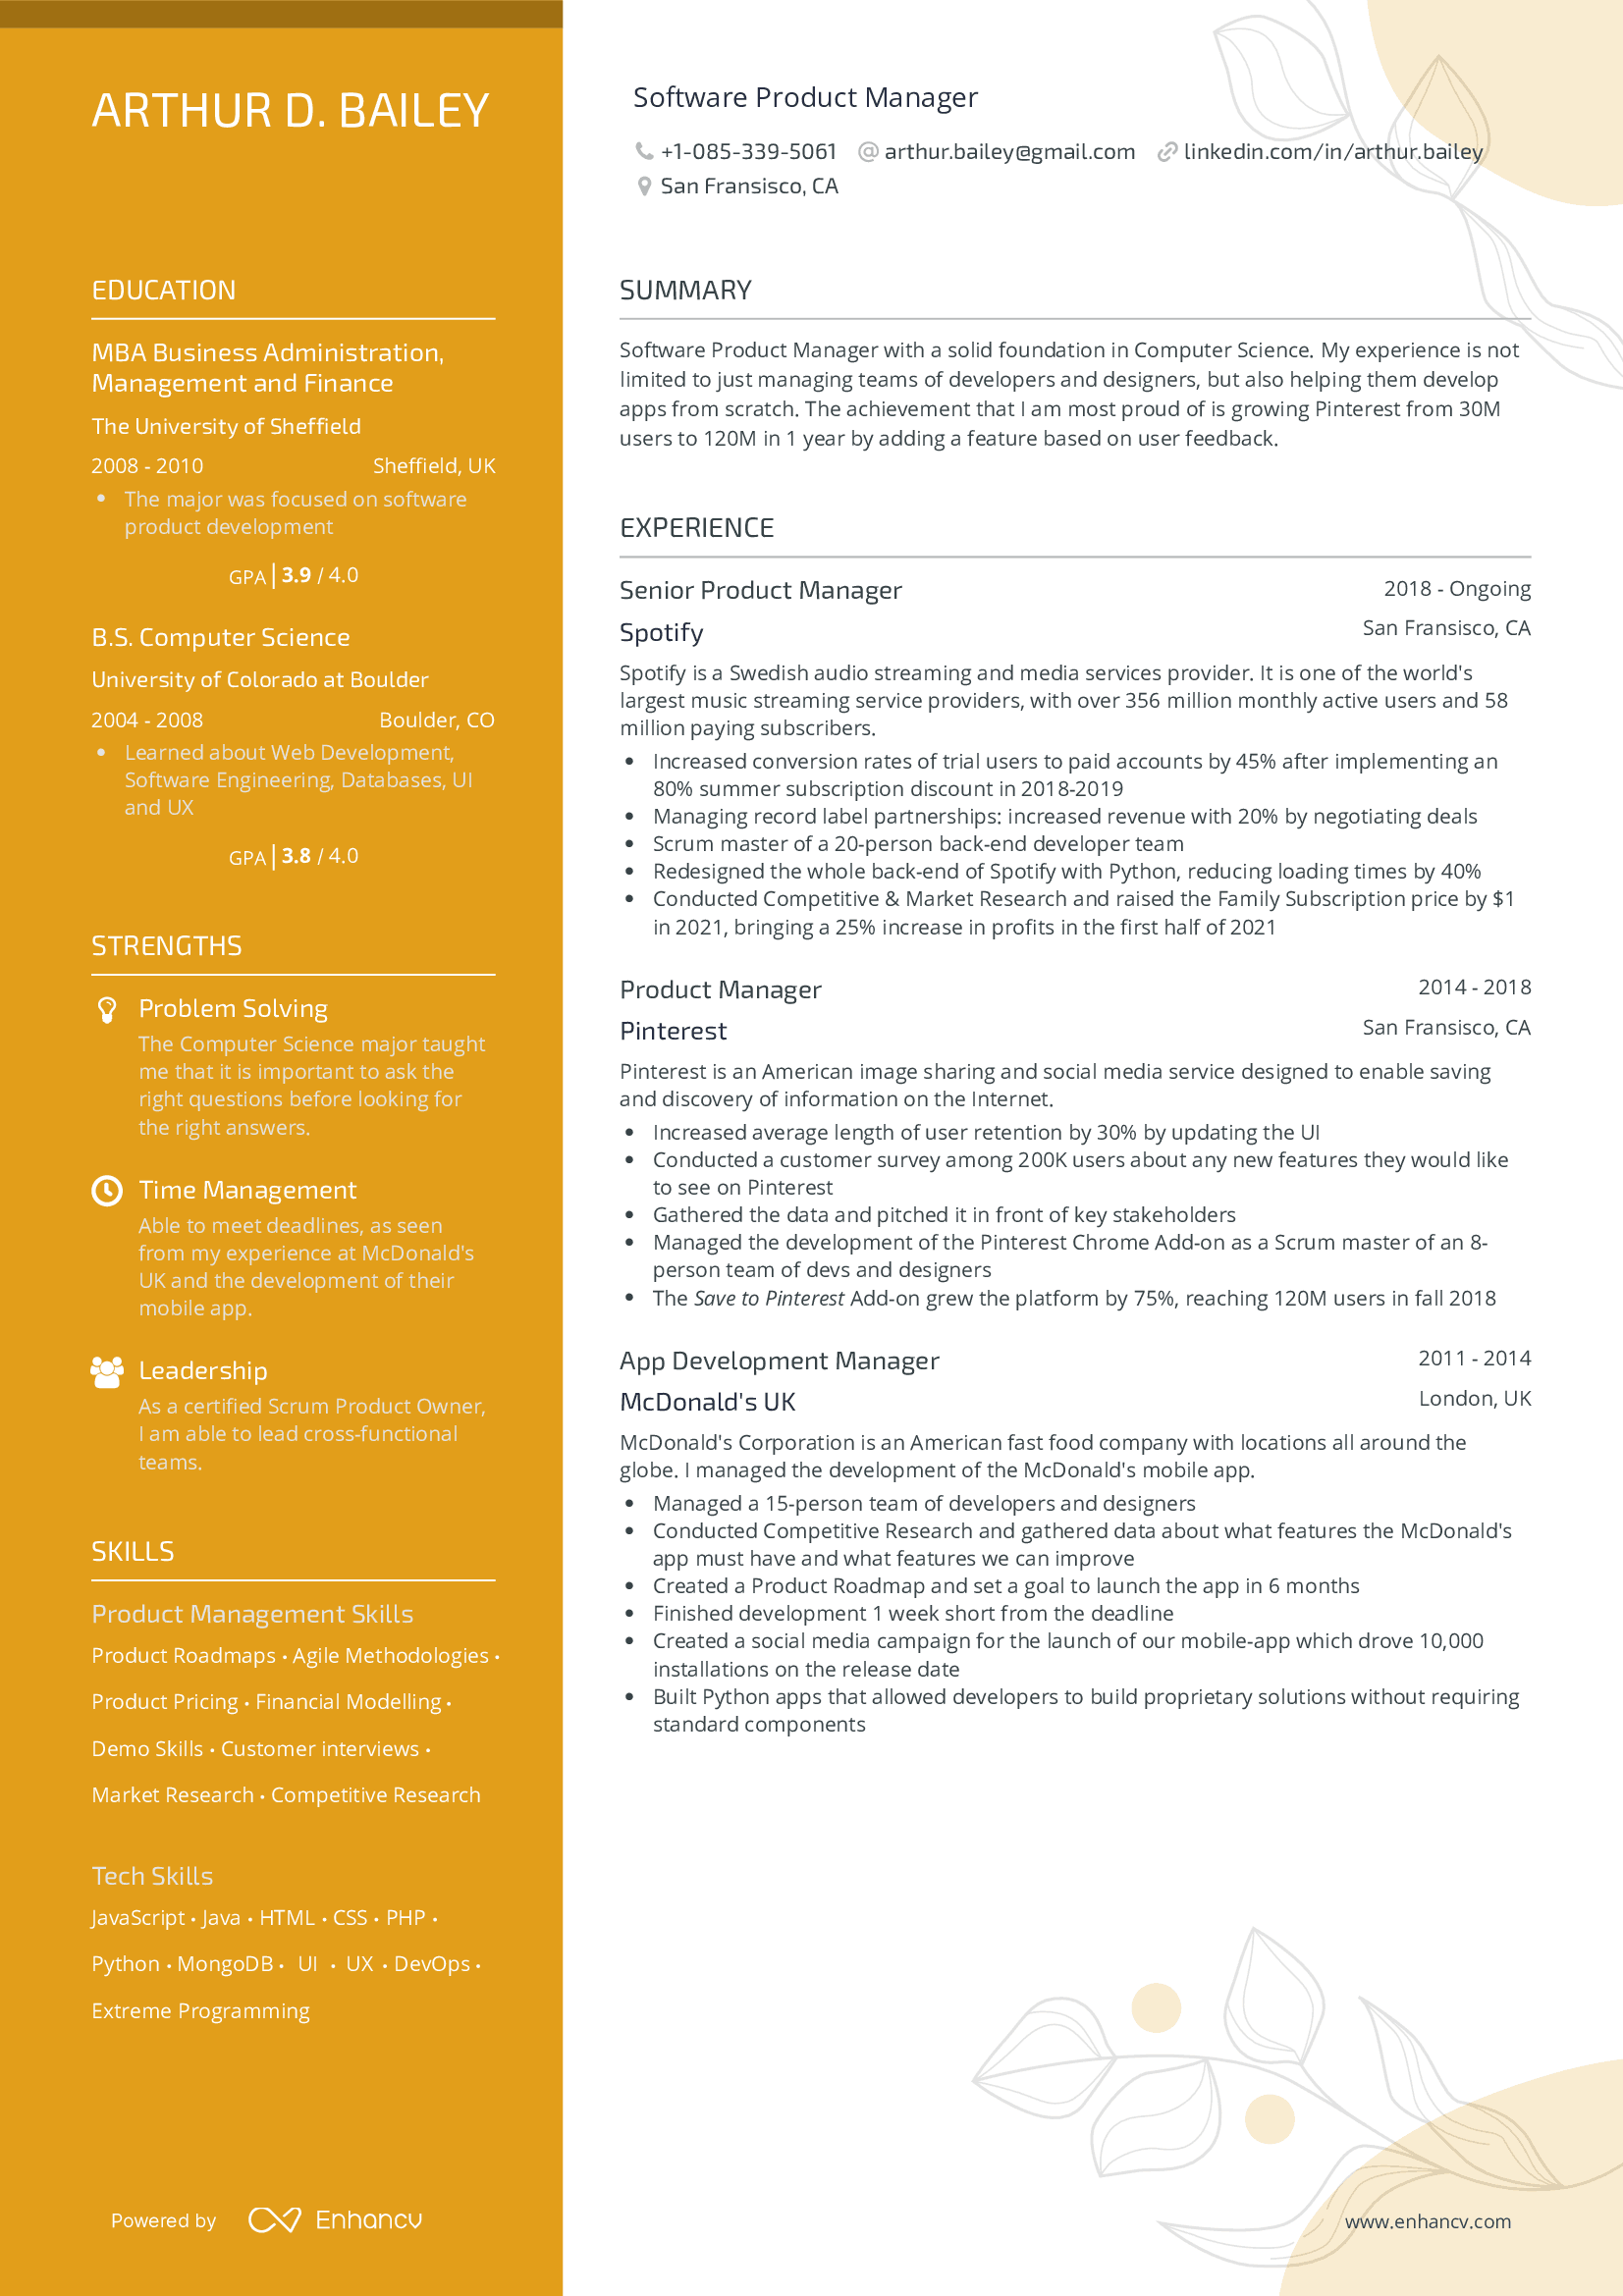 Software Product Manager resume.png